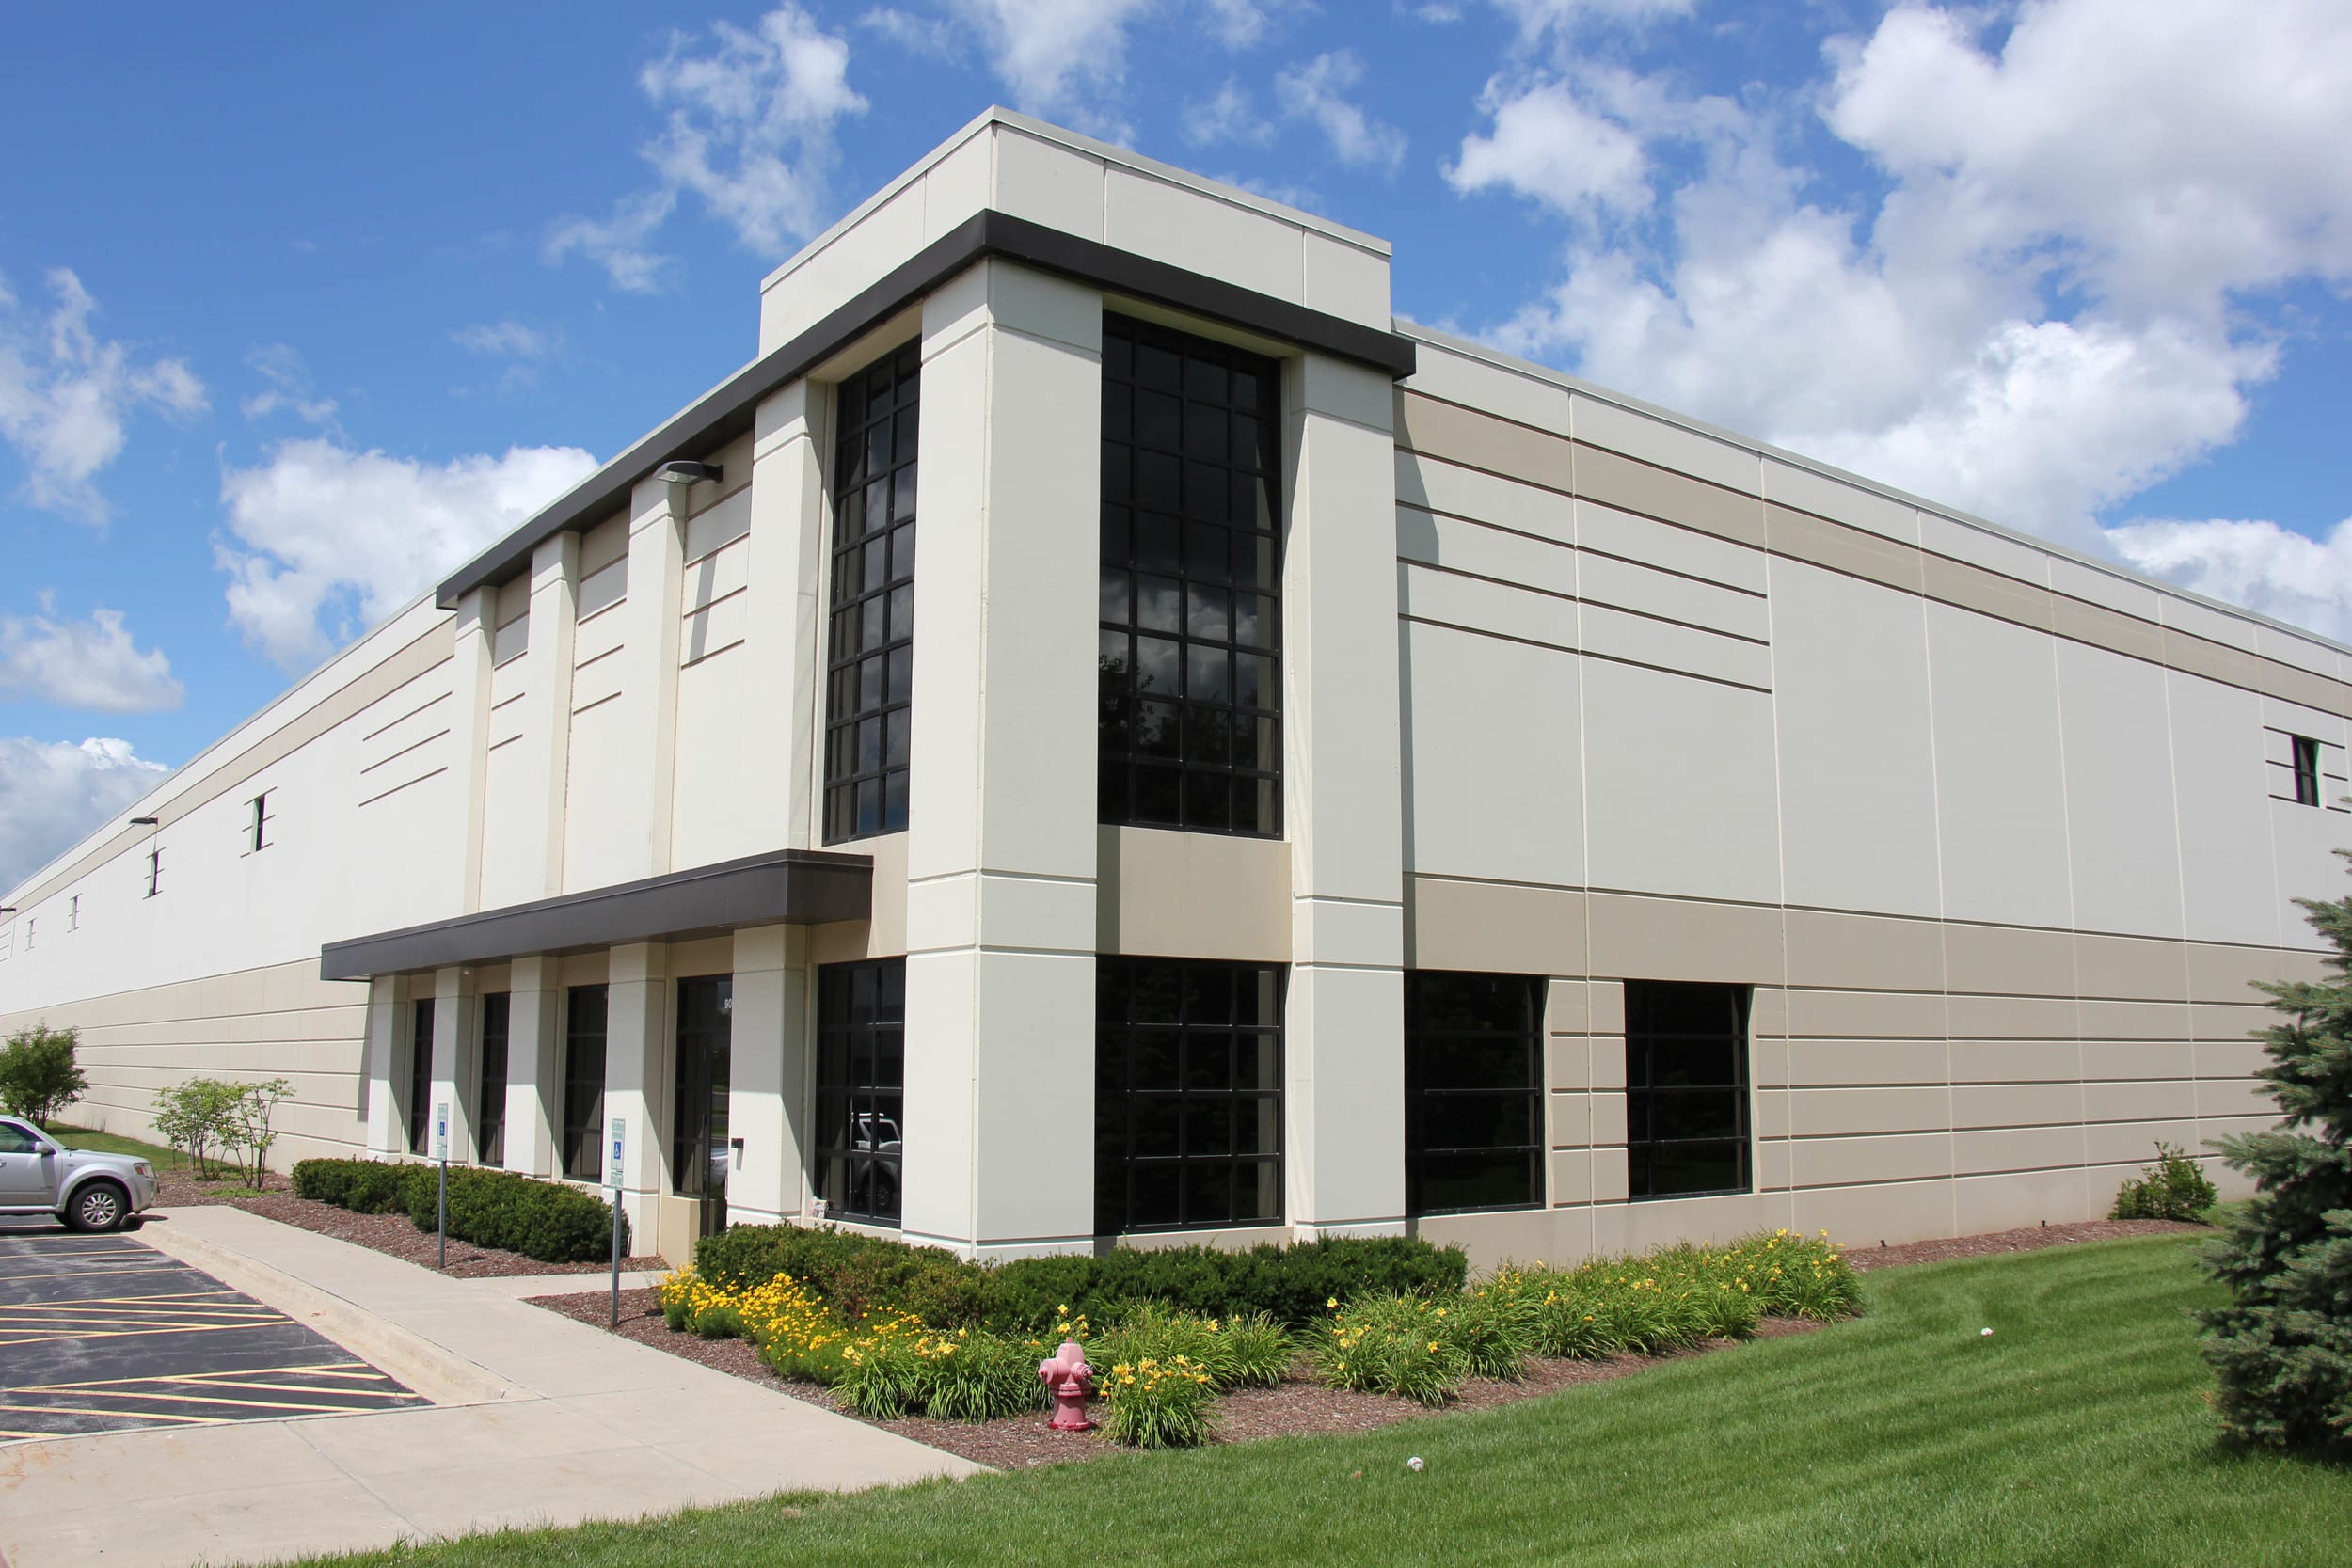 NAI Hiffman represents large, institutional owner in three recent lease transactions